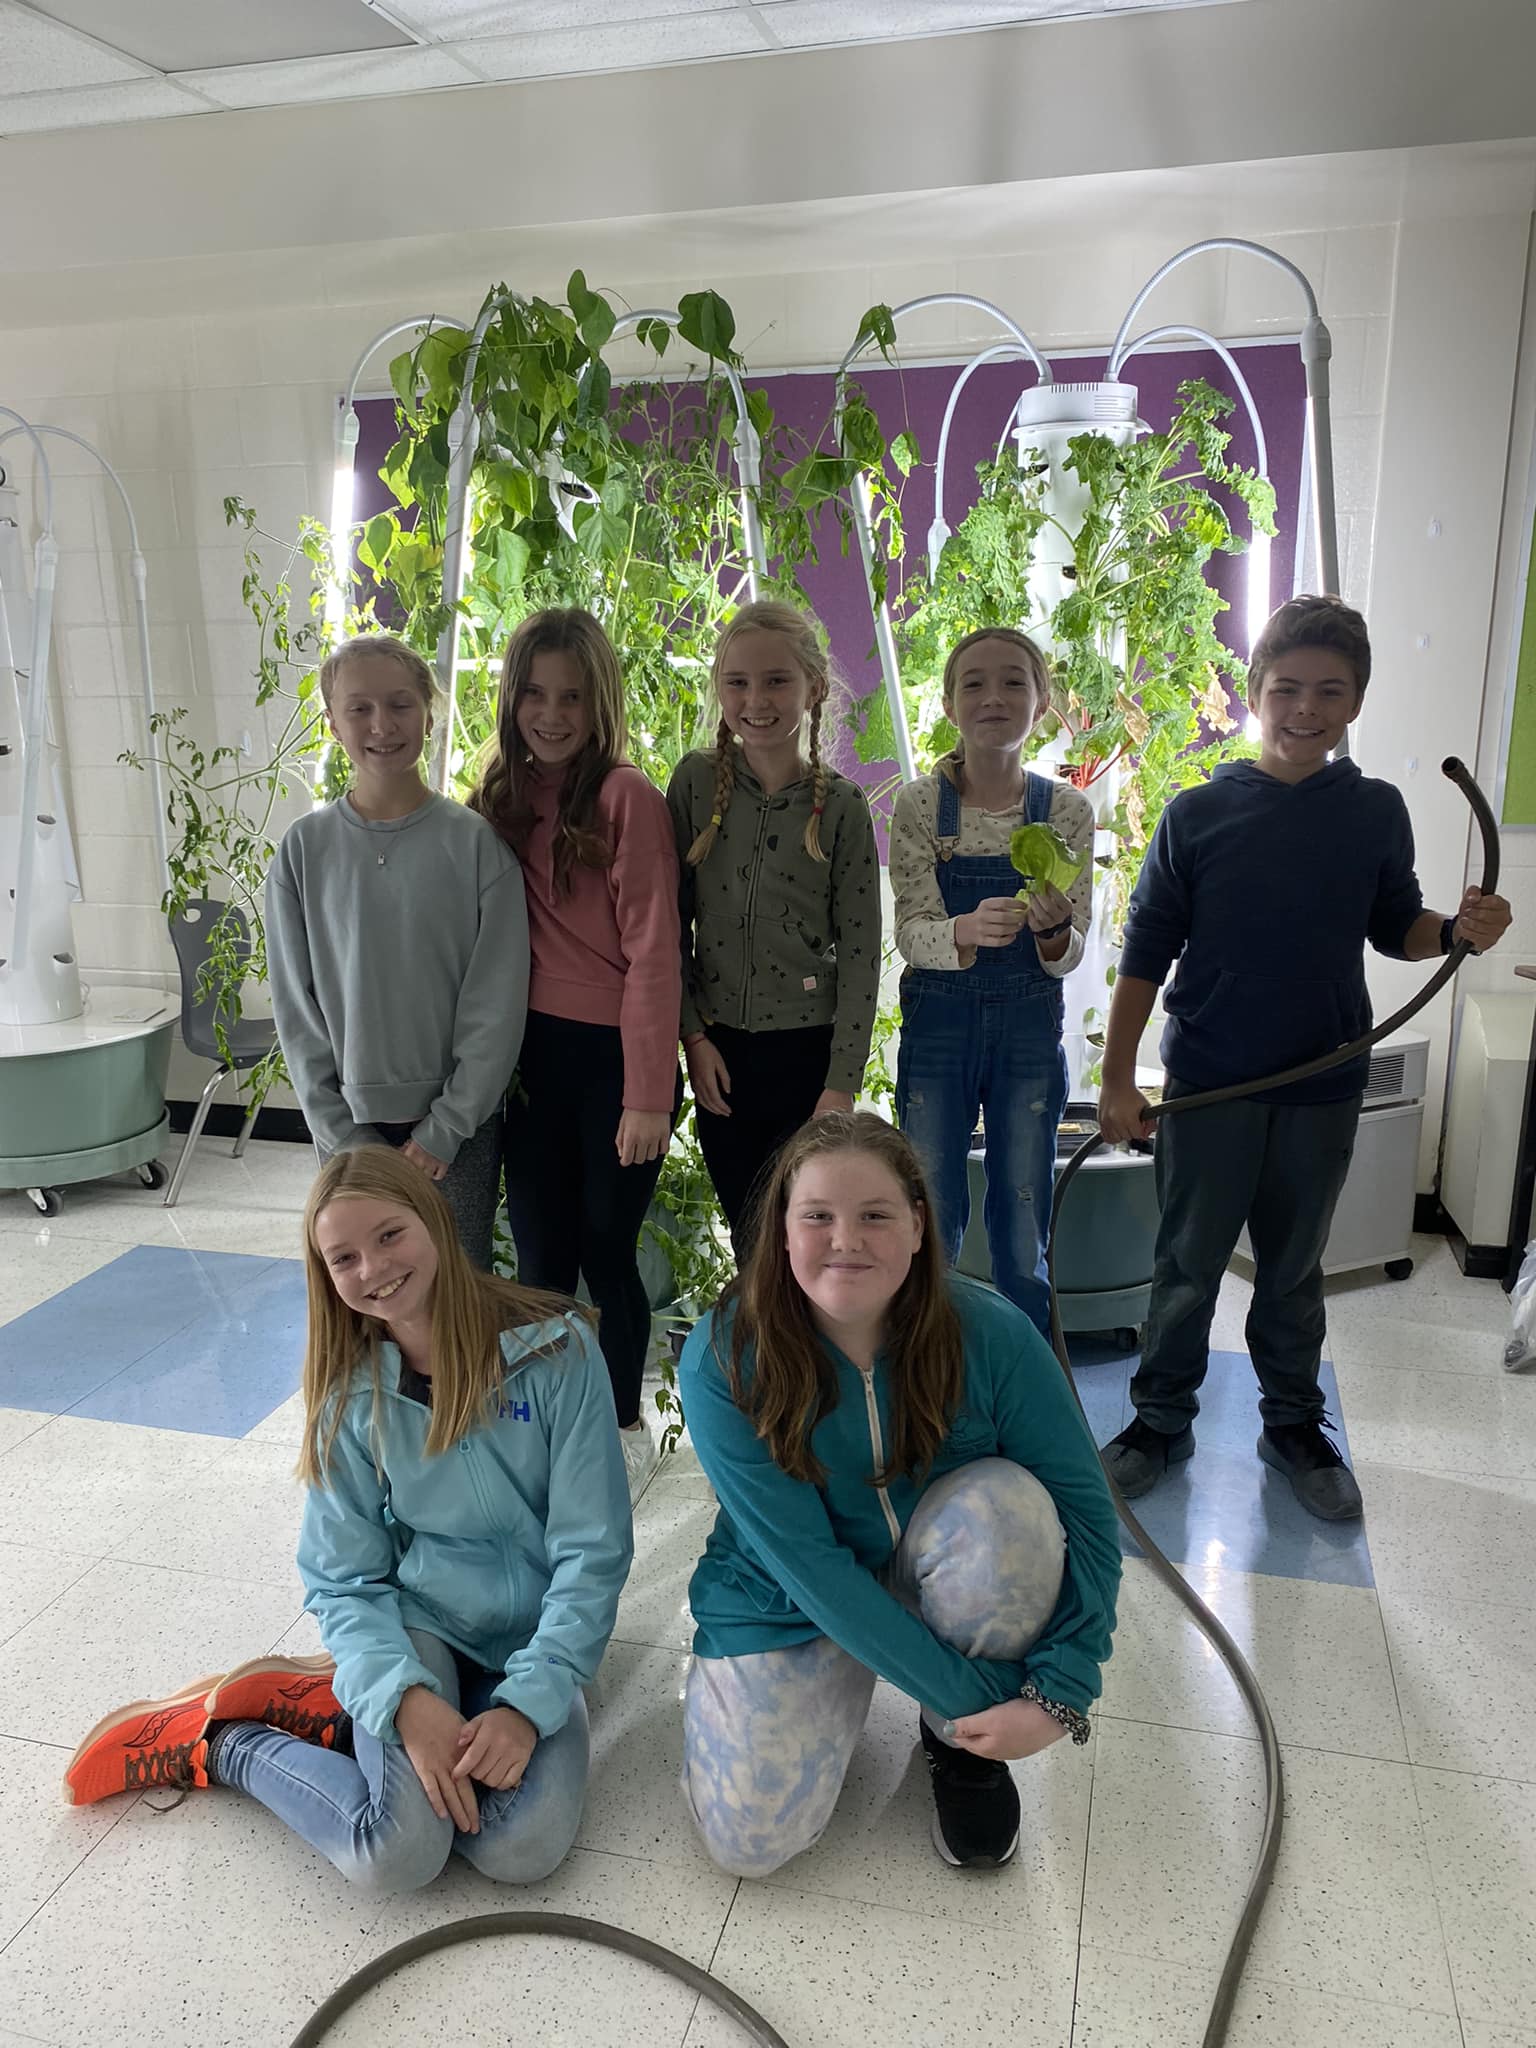 YRPS's Horticulture Club learning to grow food on The Cupboard's Indoor Grow Towers.